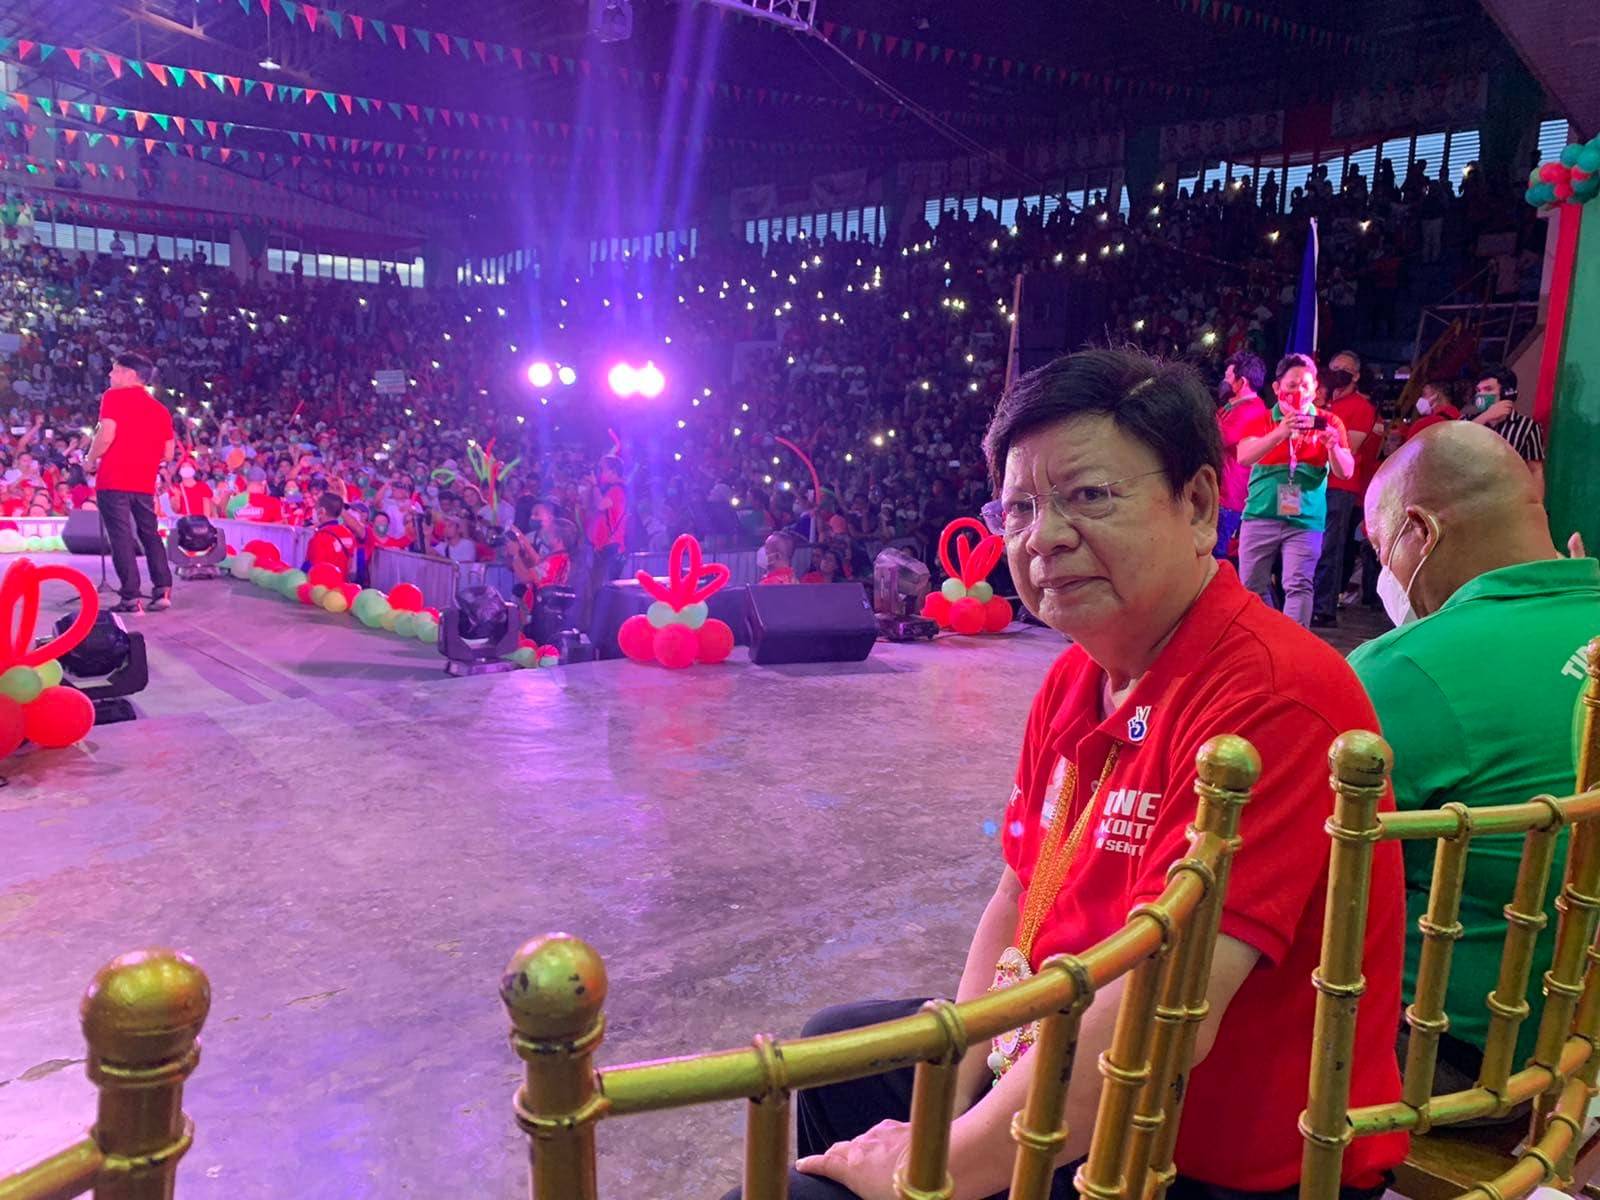 Rodante Marcoleta sits on stage during a BBM rally